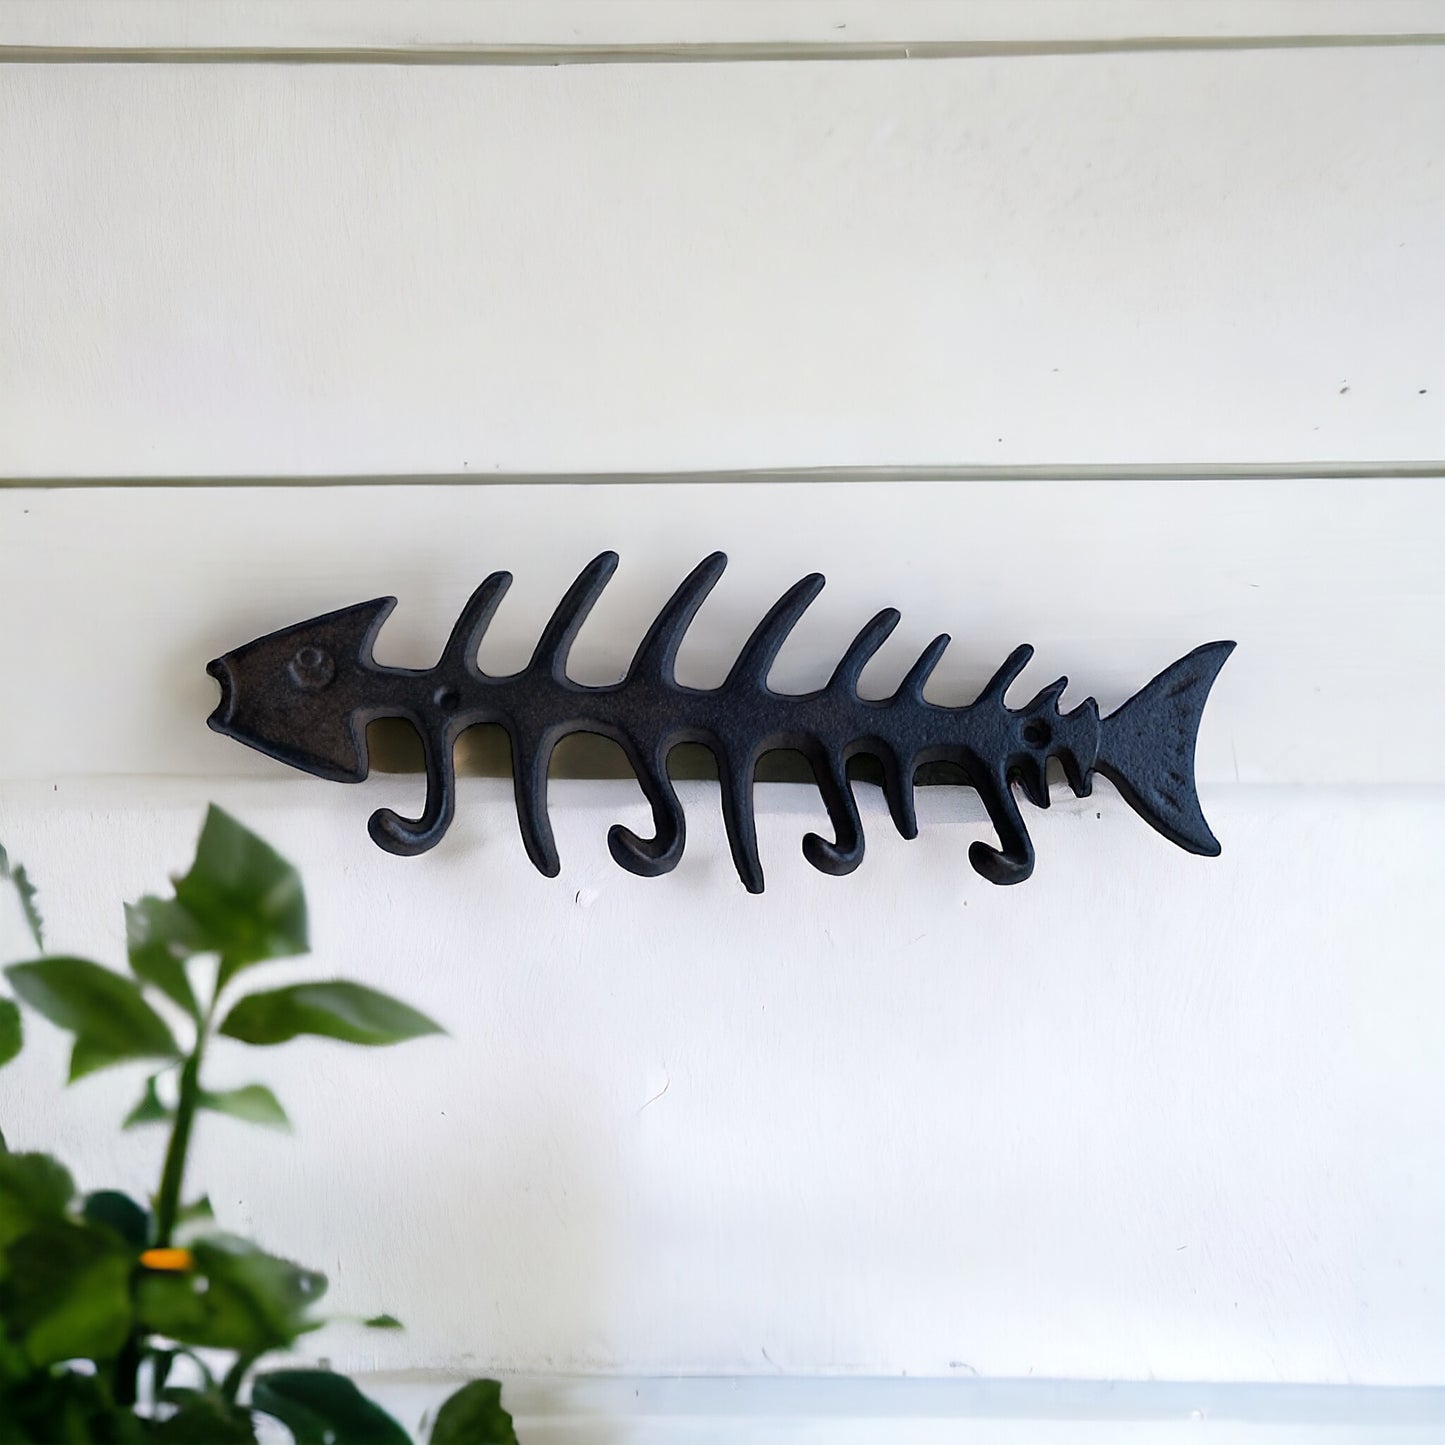 Hook Fish Bone Rustic - The Renmy Store Homewares & Gifts 